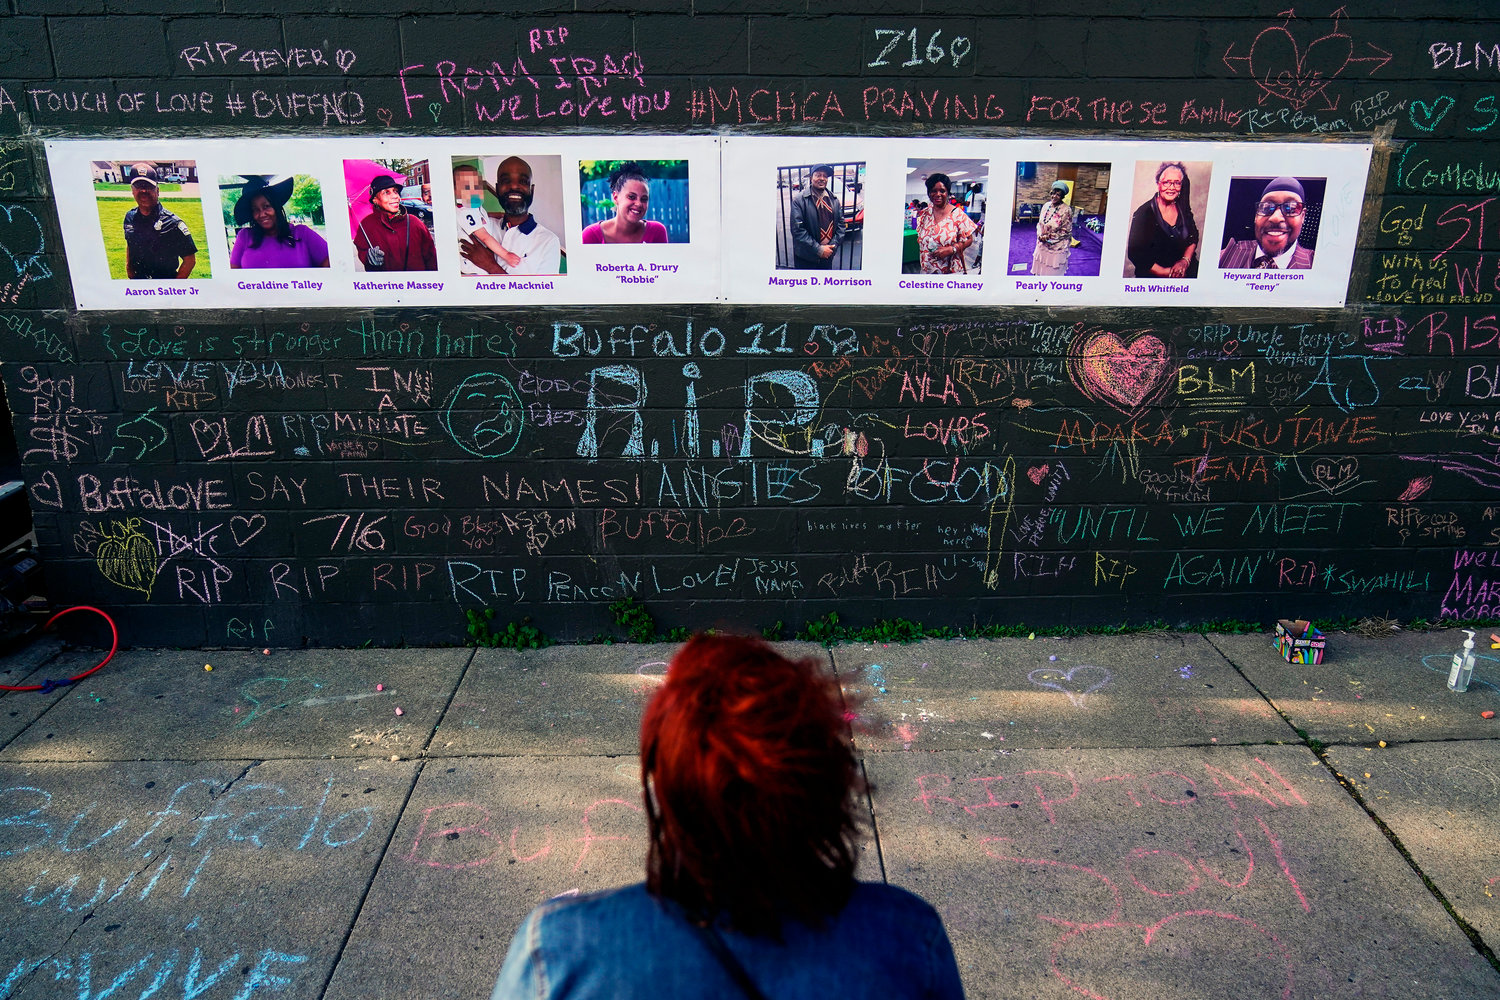 A person visits a makeshift memorial near the scene of Saturday's shooting at a supermarket, in Buffalo, Thursday, May 19, 2022. (AP Photo/Matt Rourke)